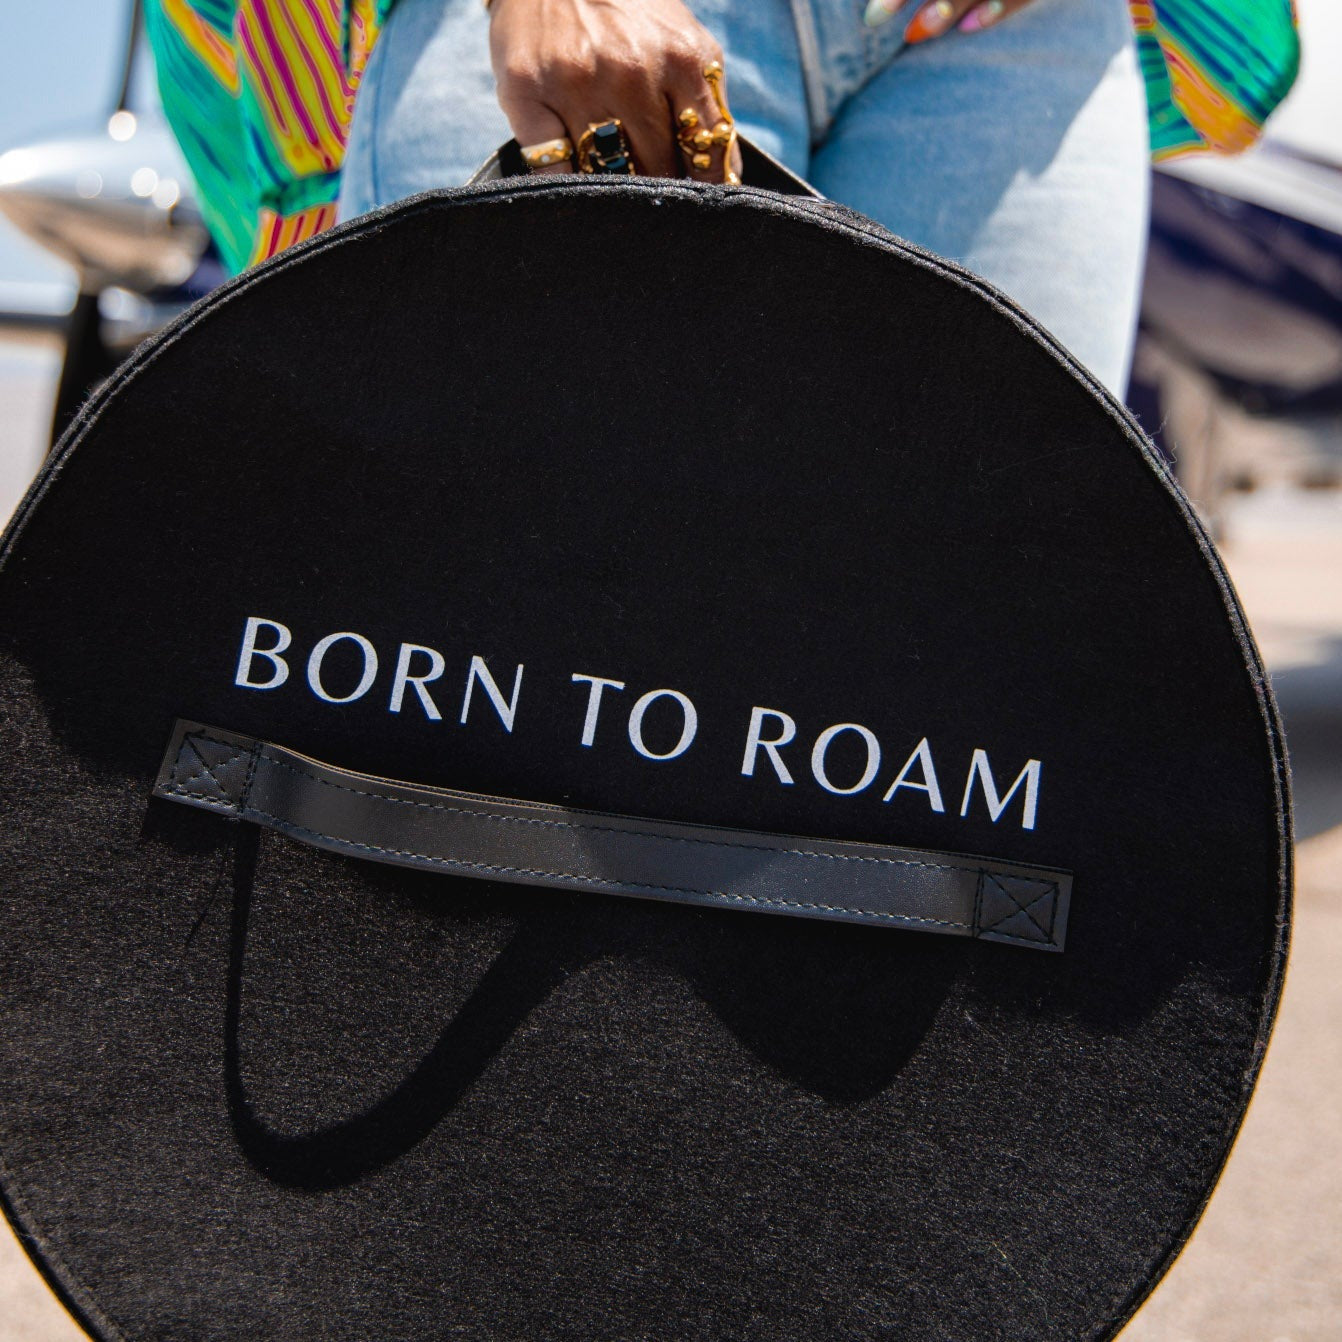 Pack your dreams with Born to Roam luggage